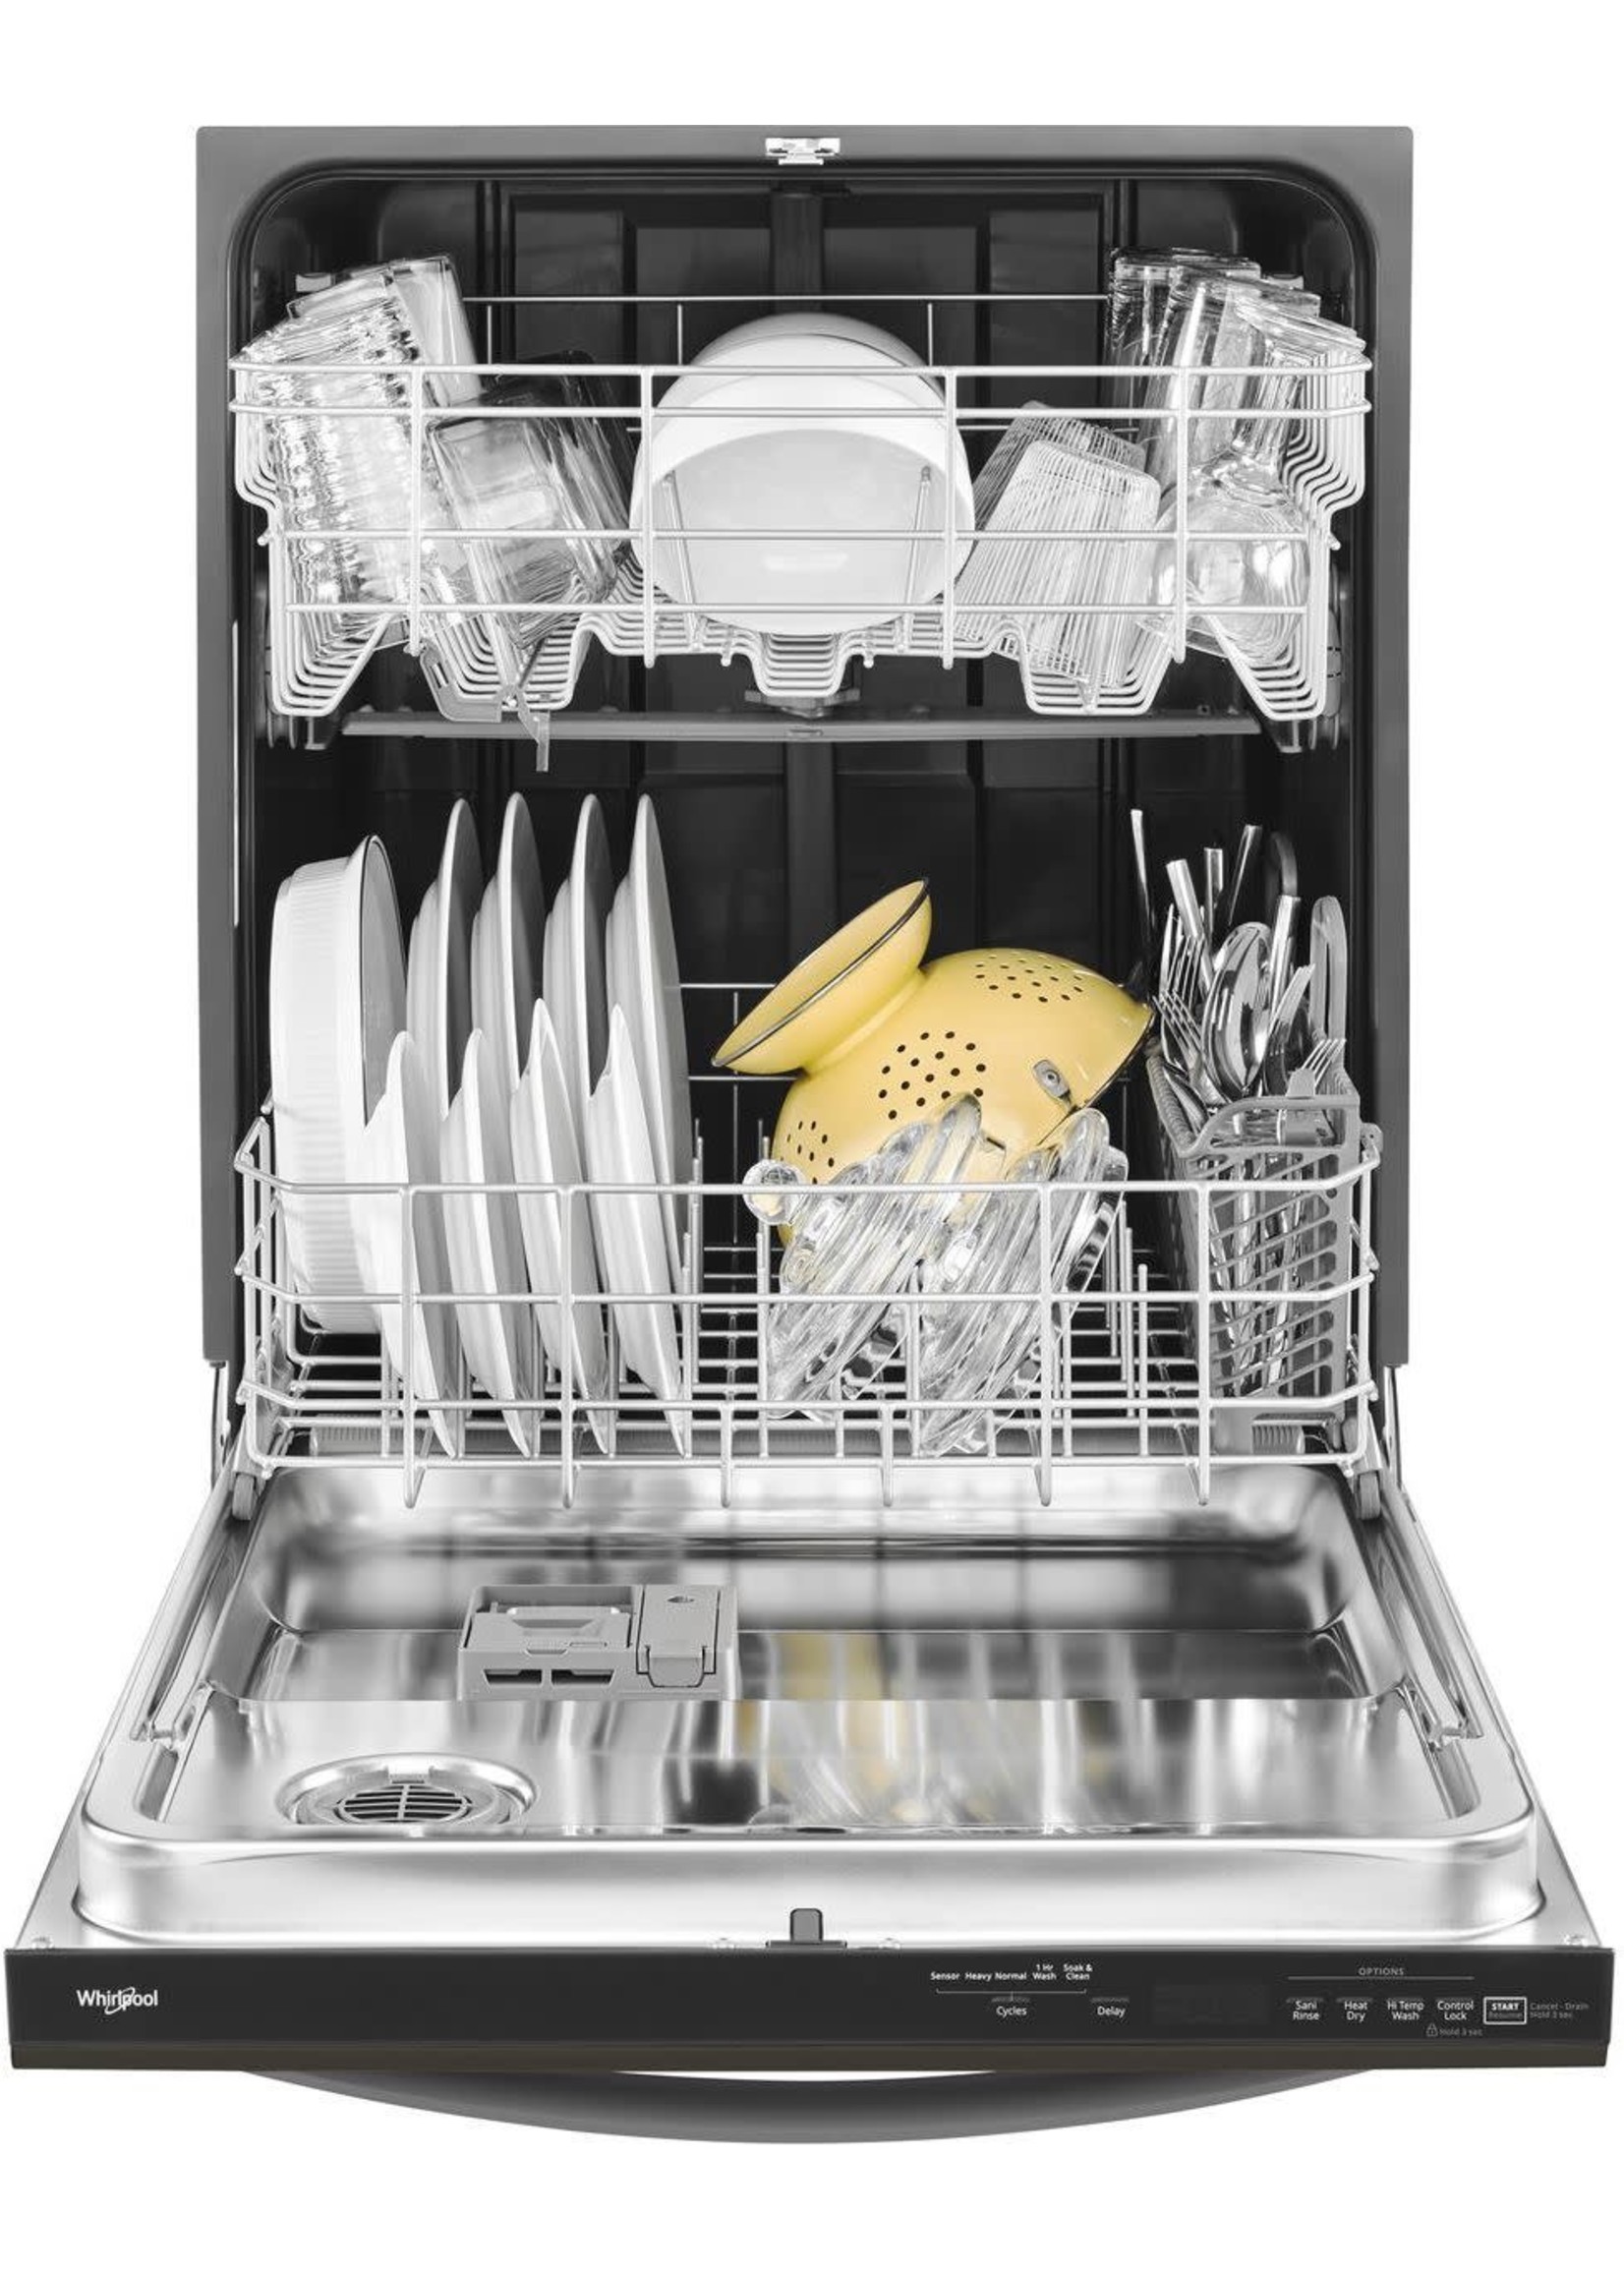 WHR Whirlpool - 24" Built-In Dishwasher - Black stainless steel